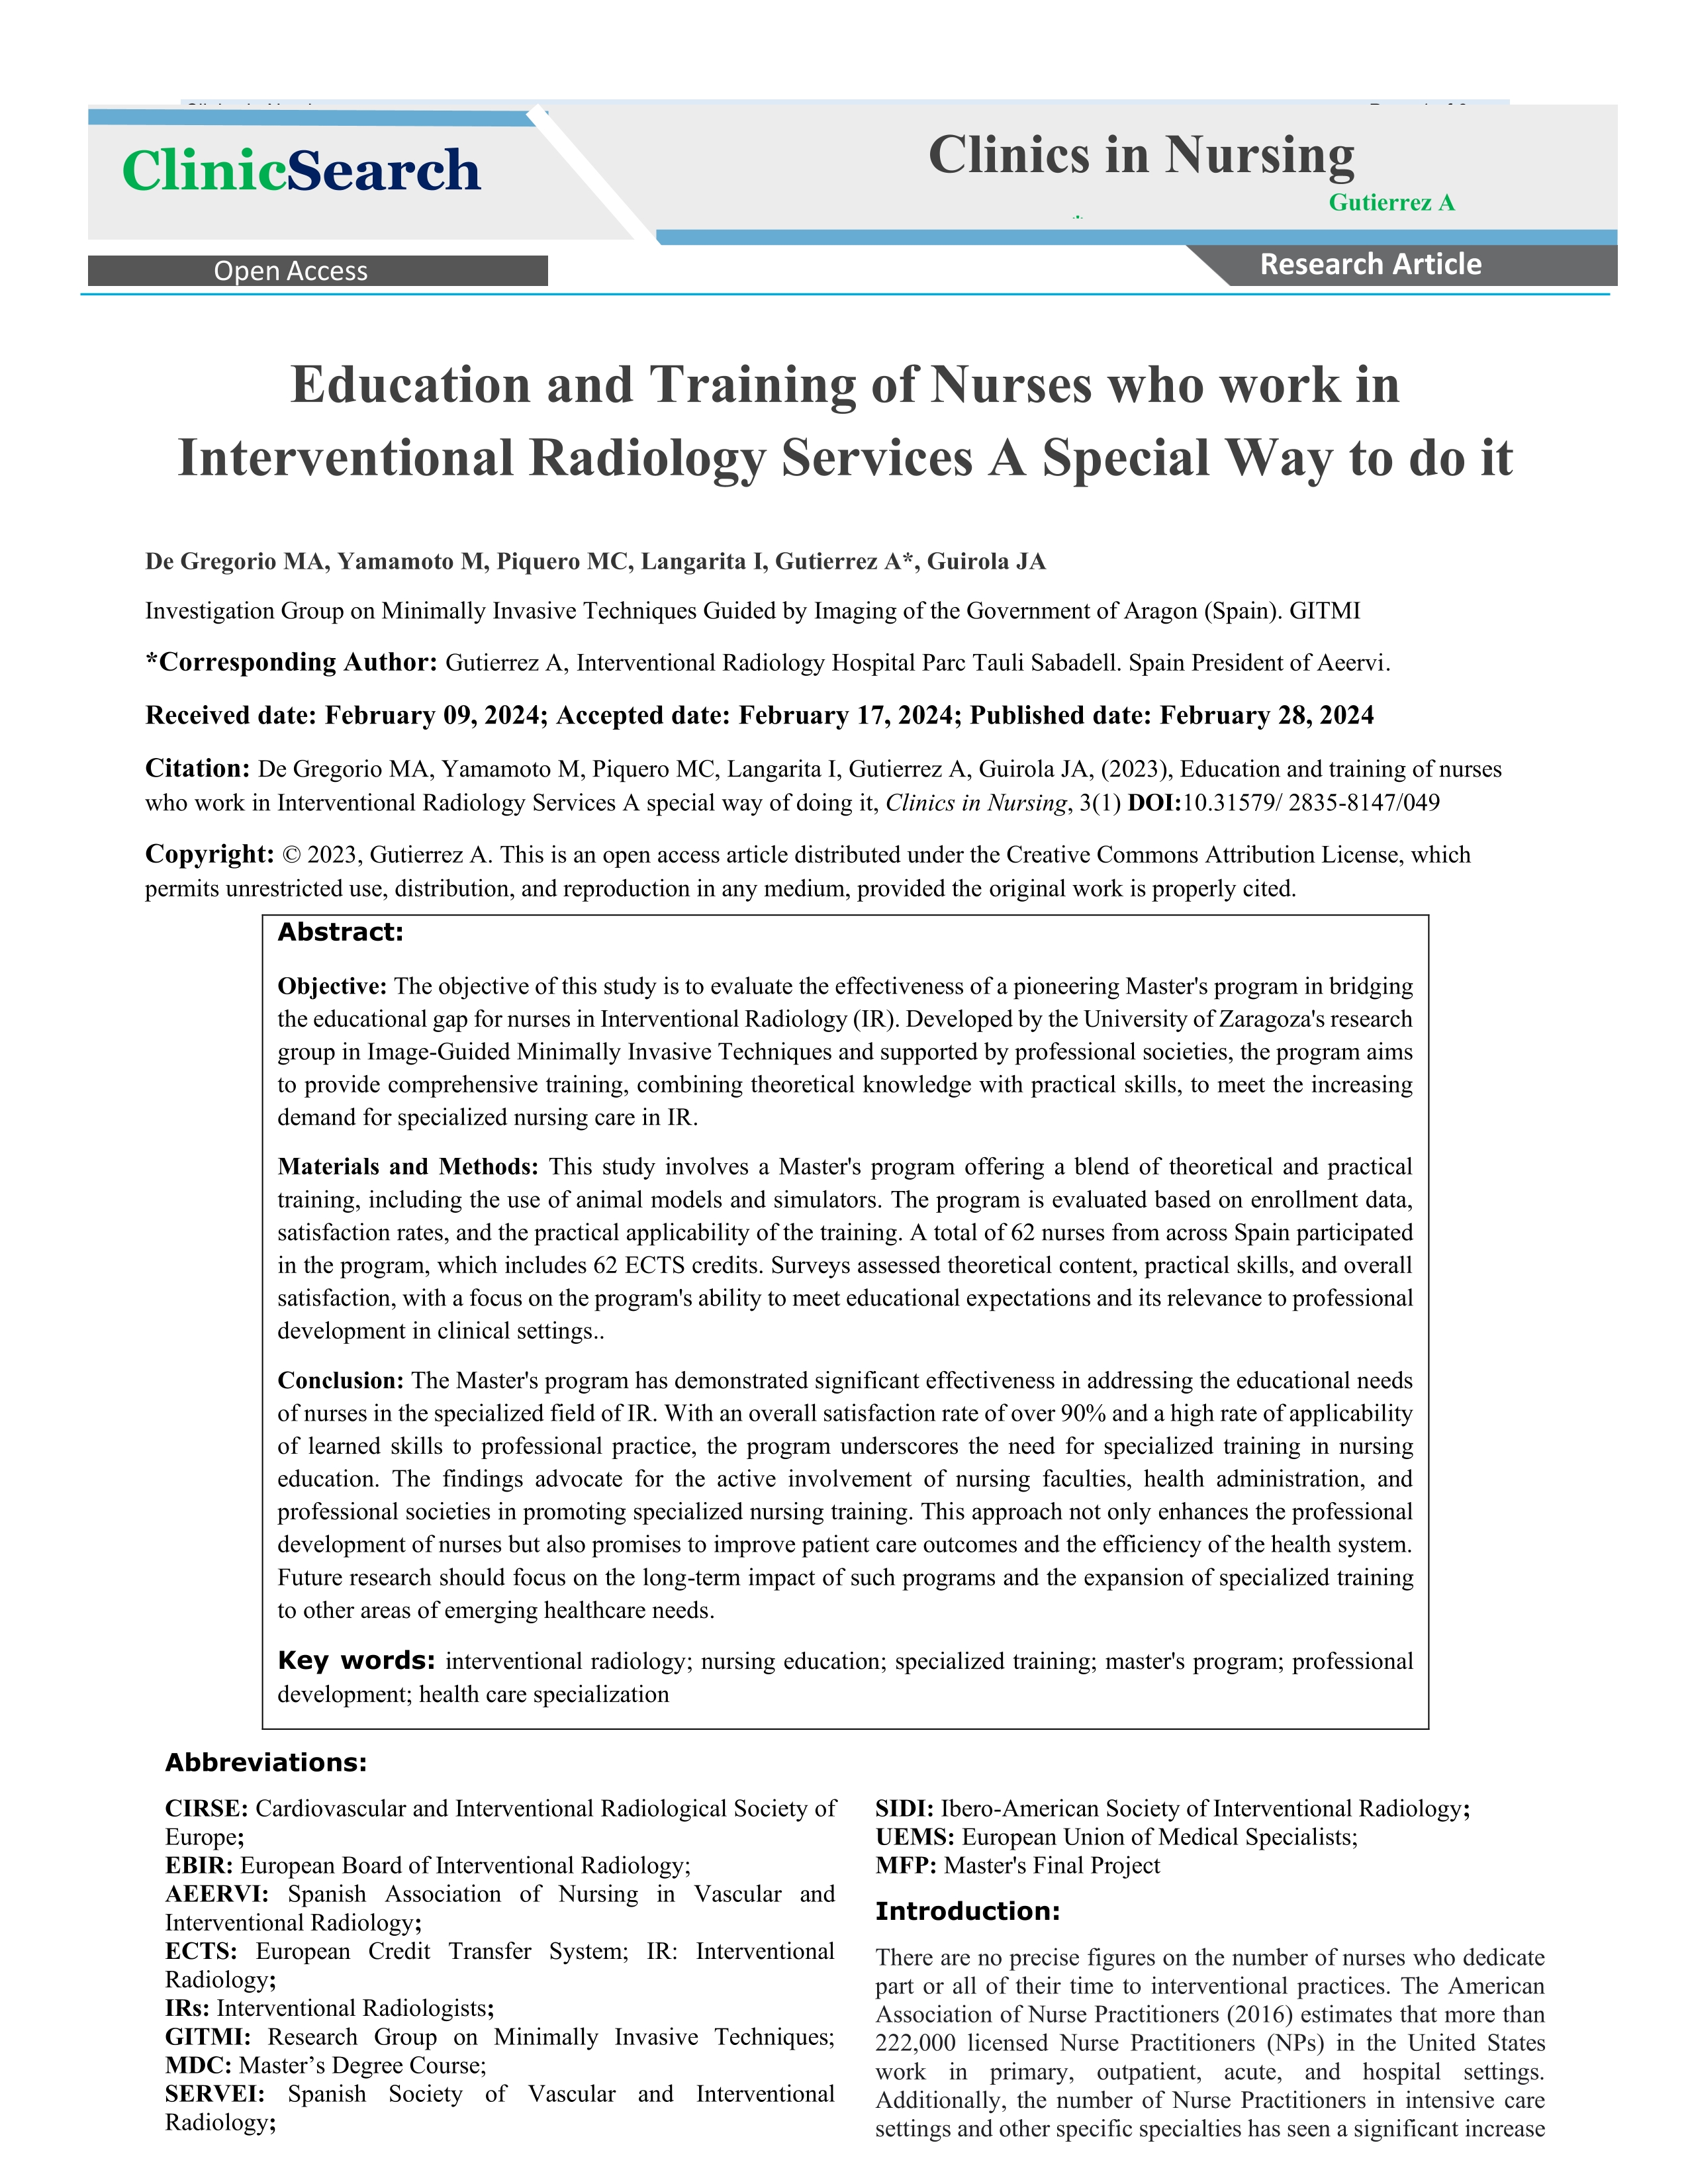 Education and Training of Nurses Who Work in Interventional Radiology Services A Special Way to do it